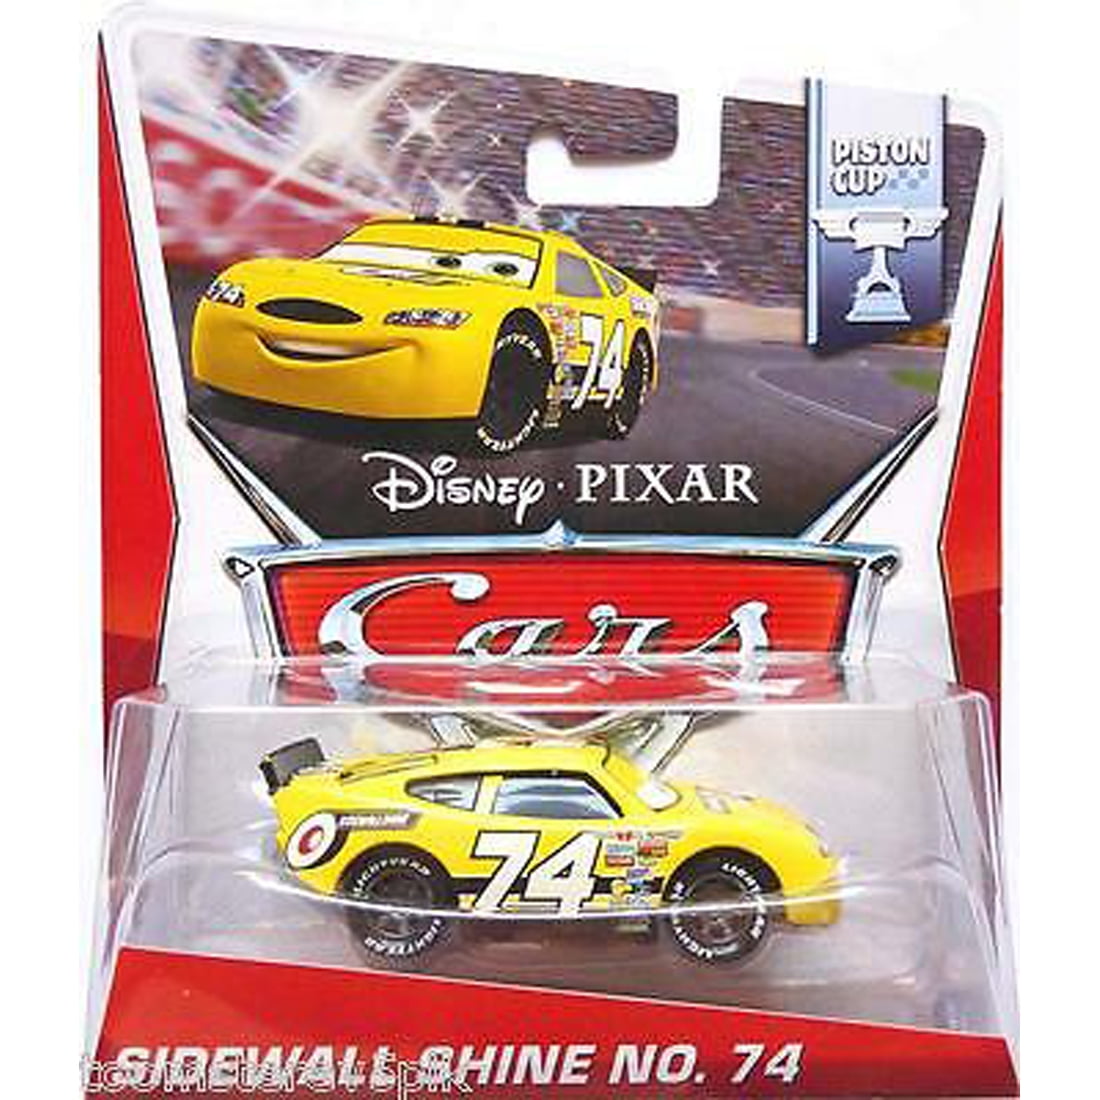 74 by Cars Disney/ Pixar Cars Synthetik Rubber Tires SIDEWALL SHINE NO